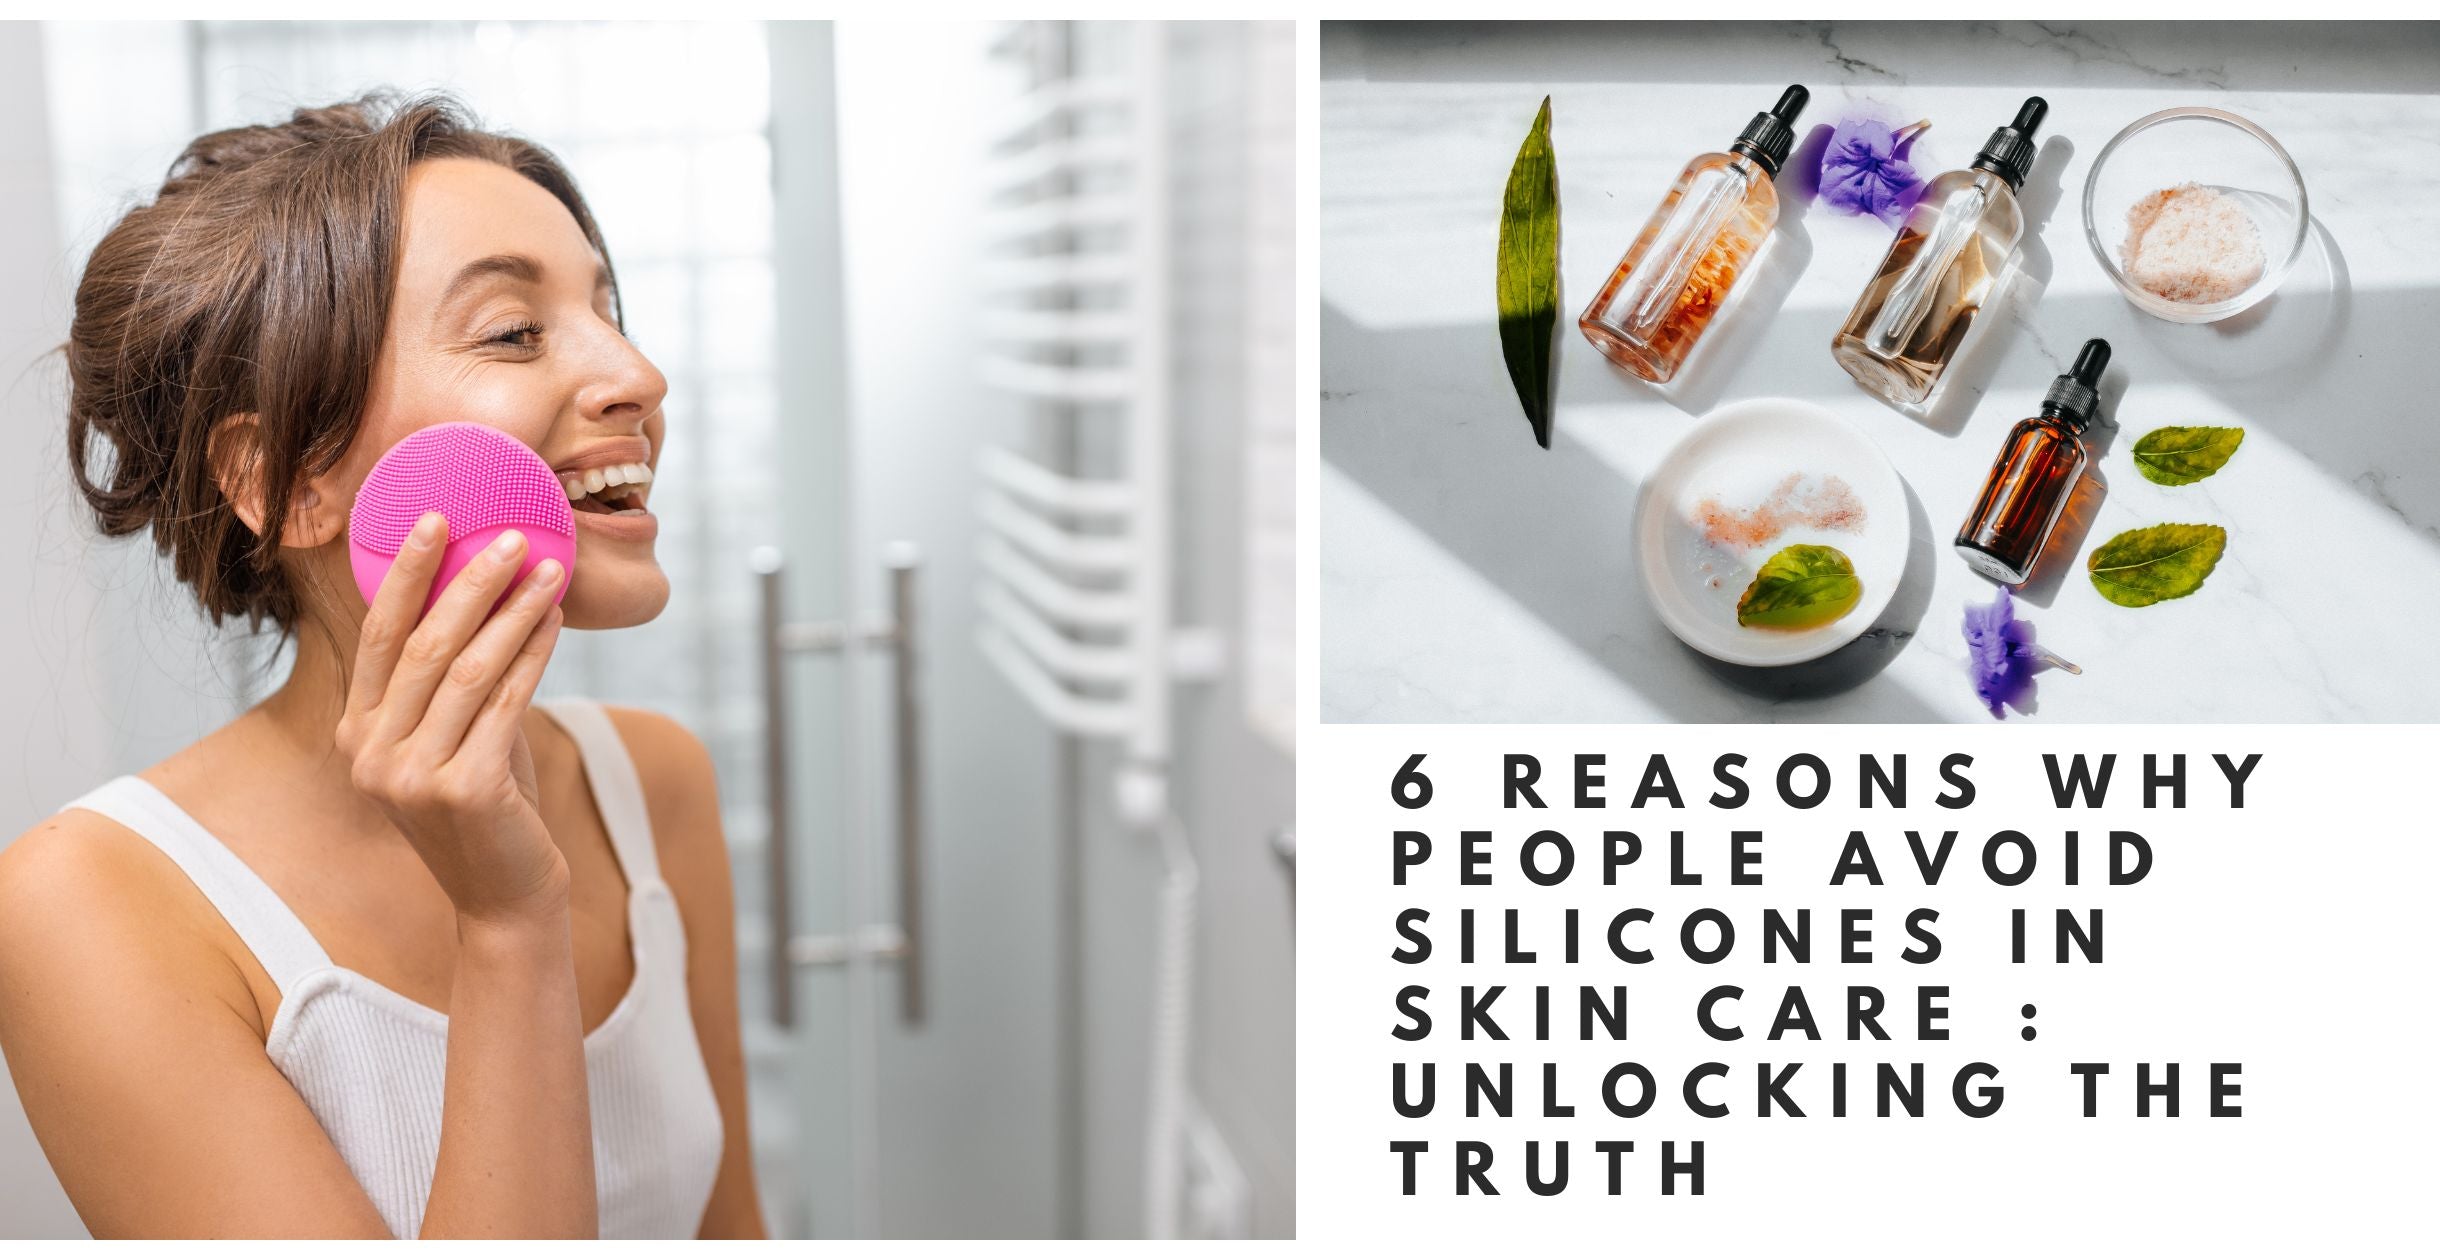 6 Reasons Why People Avoid Silicones in Skin Care : Unlocking the Truth